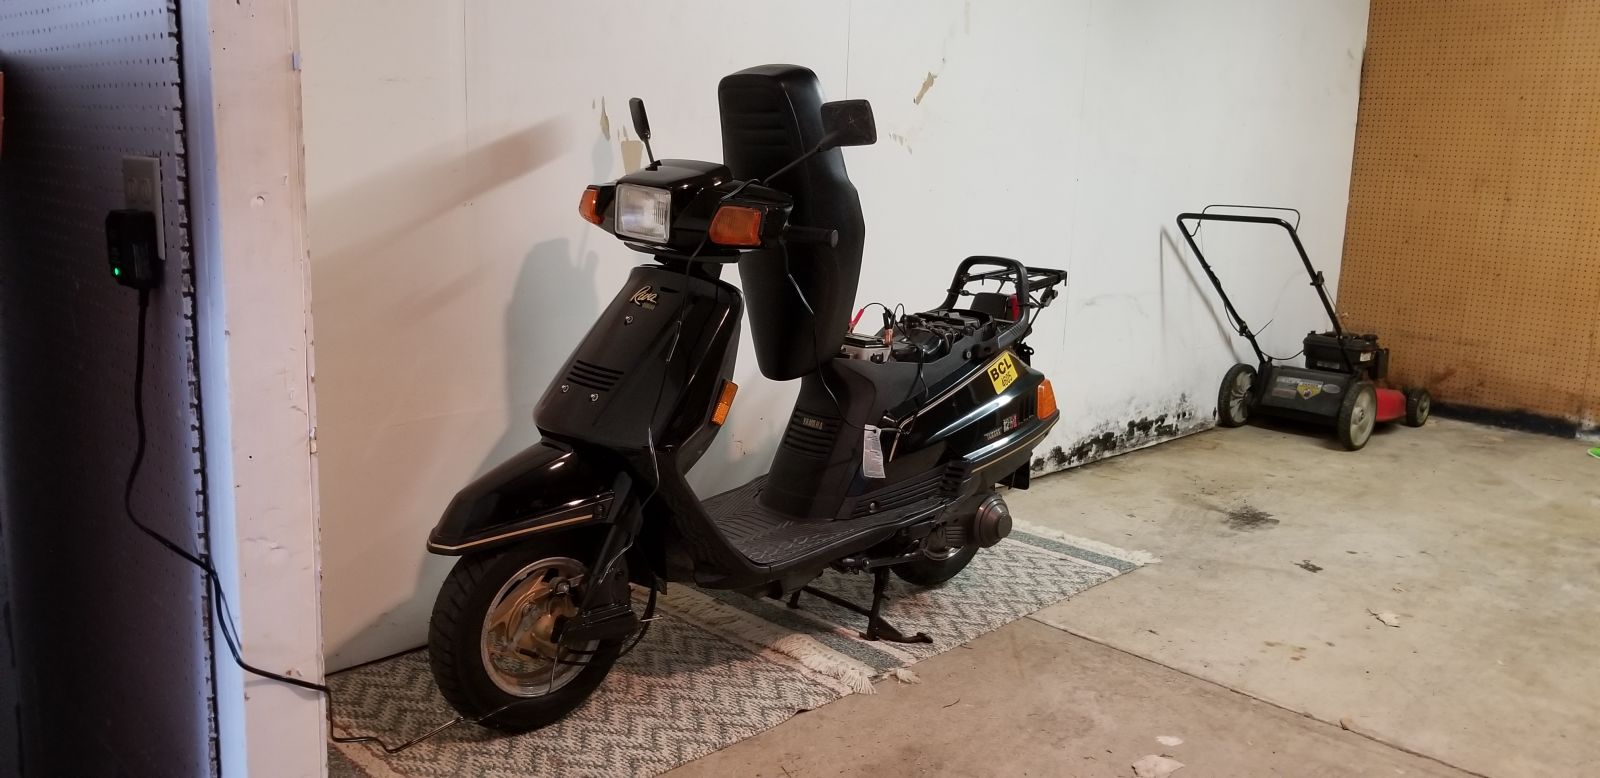 My scooter as it sits today, waiting for warmer weather.